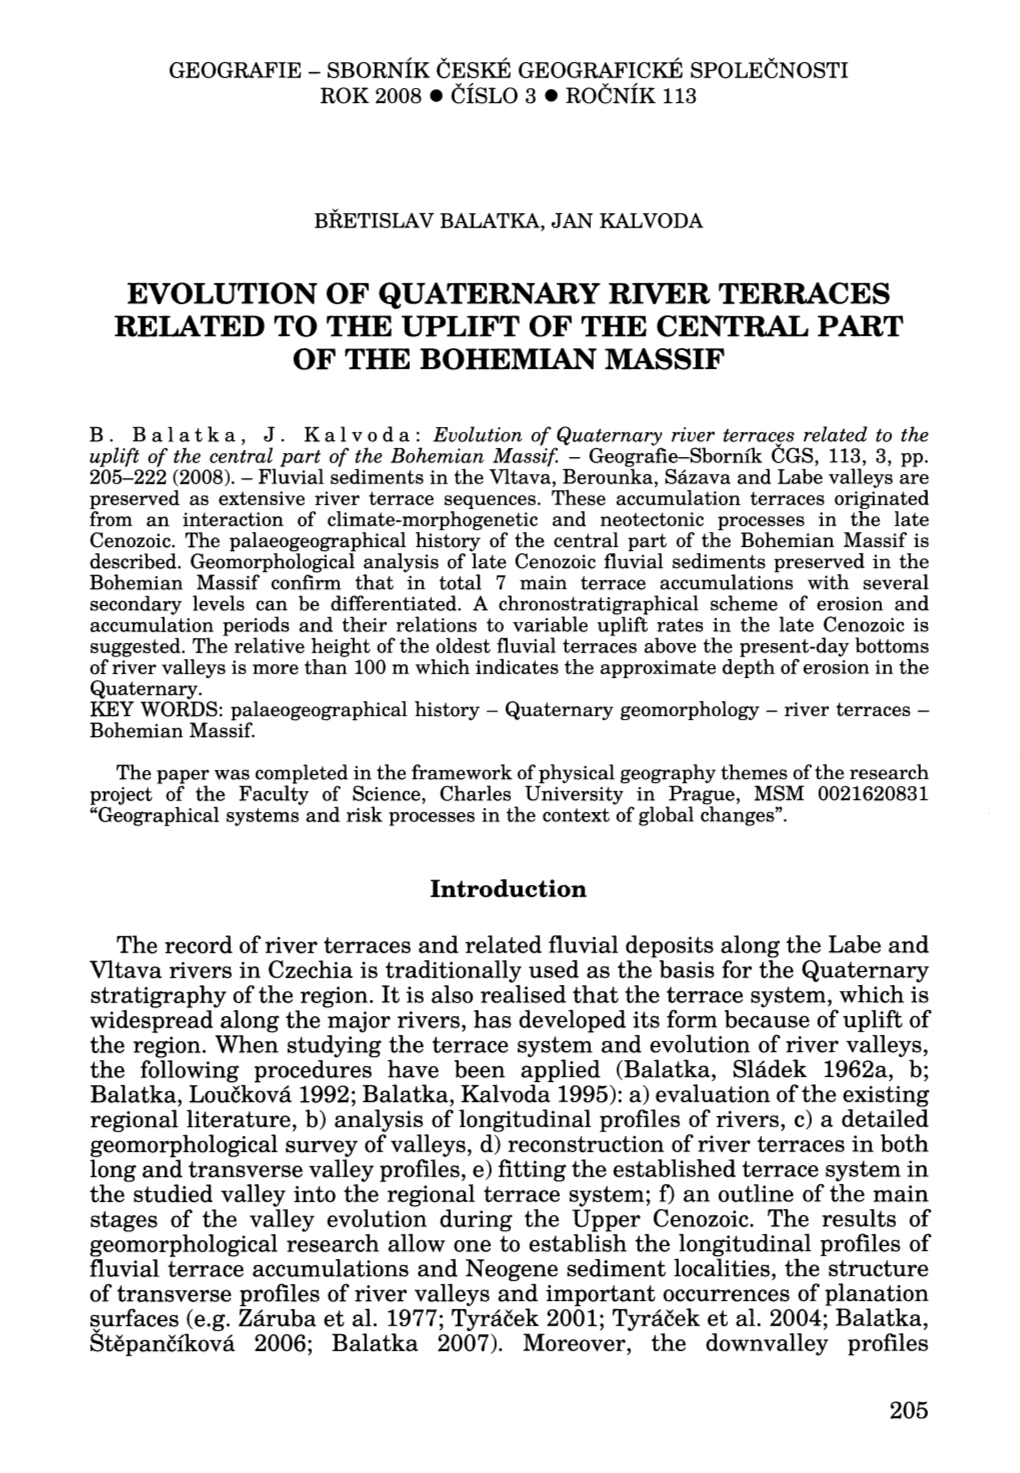 Evolution of Quaternary River Terraces Related to the Uplift of the Central Part of the Bohemian Massif